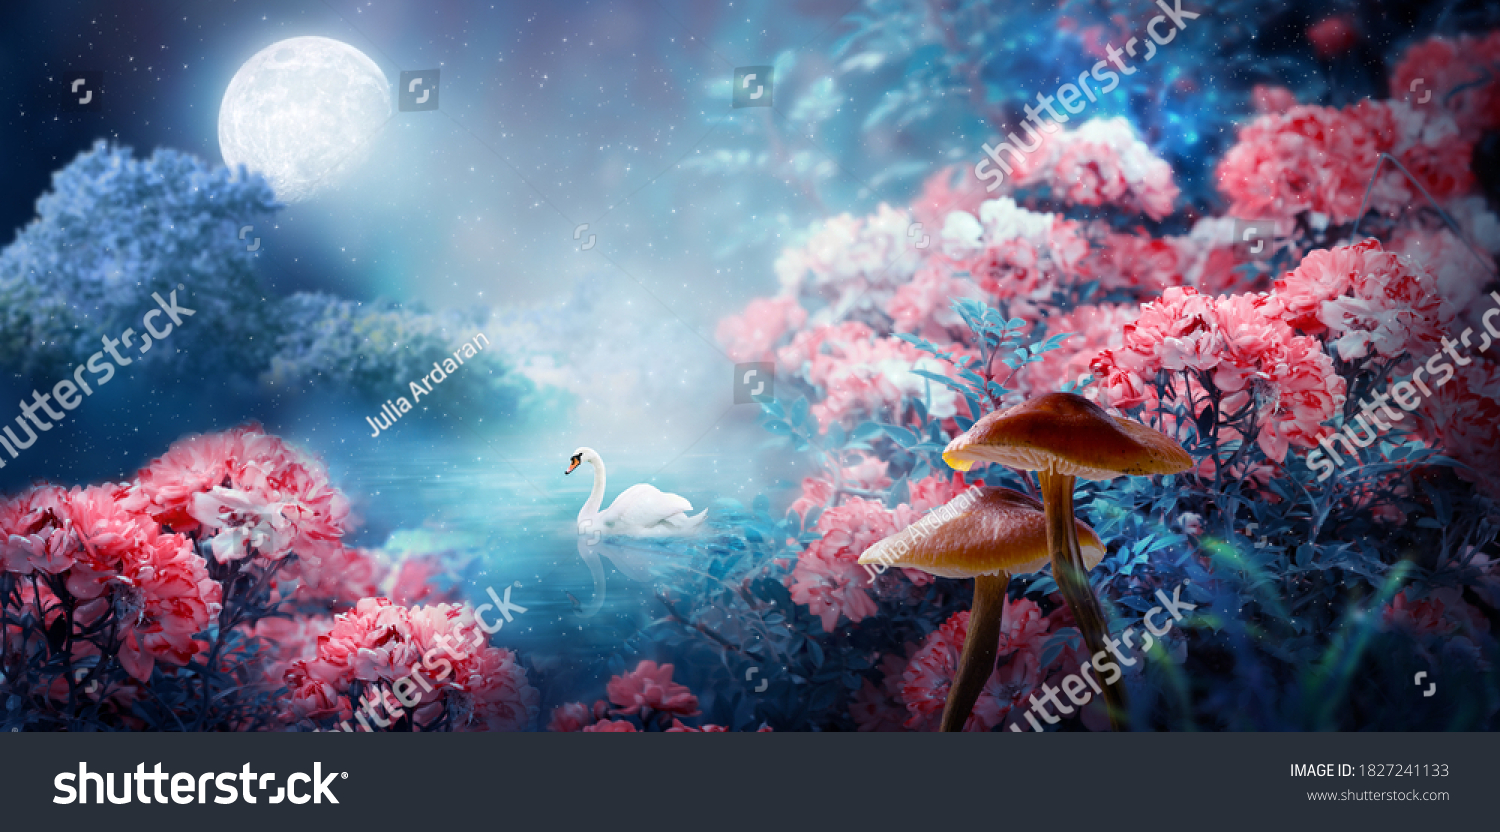 Fantasy magical enchanted fairy tale landscape with swan swimming in lake, fabulous fairytale blooming pink rose flower garden and mushrooms on mysterious blue background and glowing moon ray in night